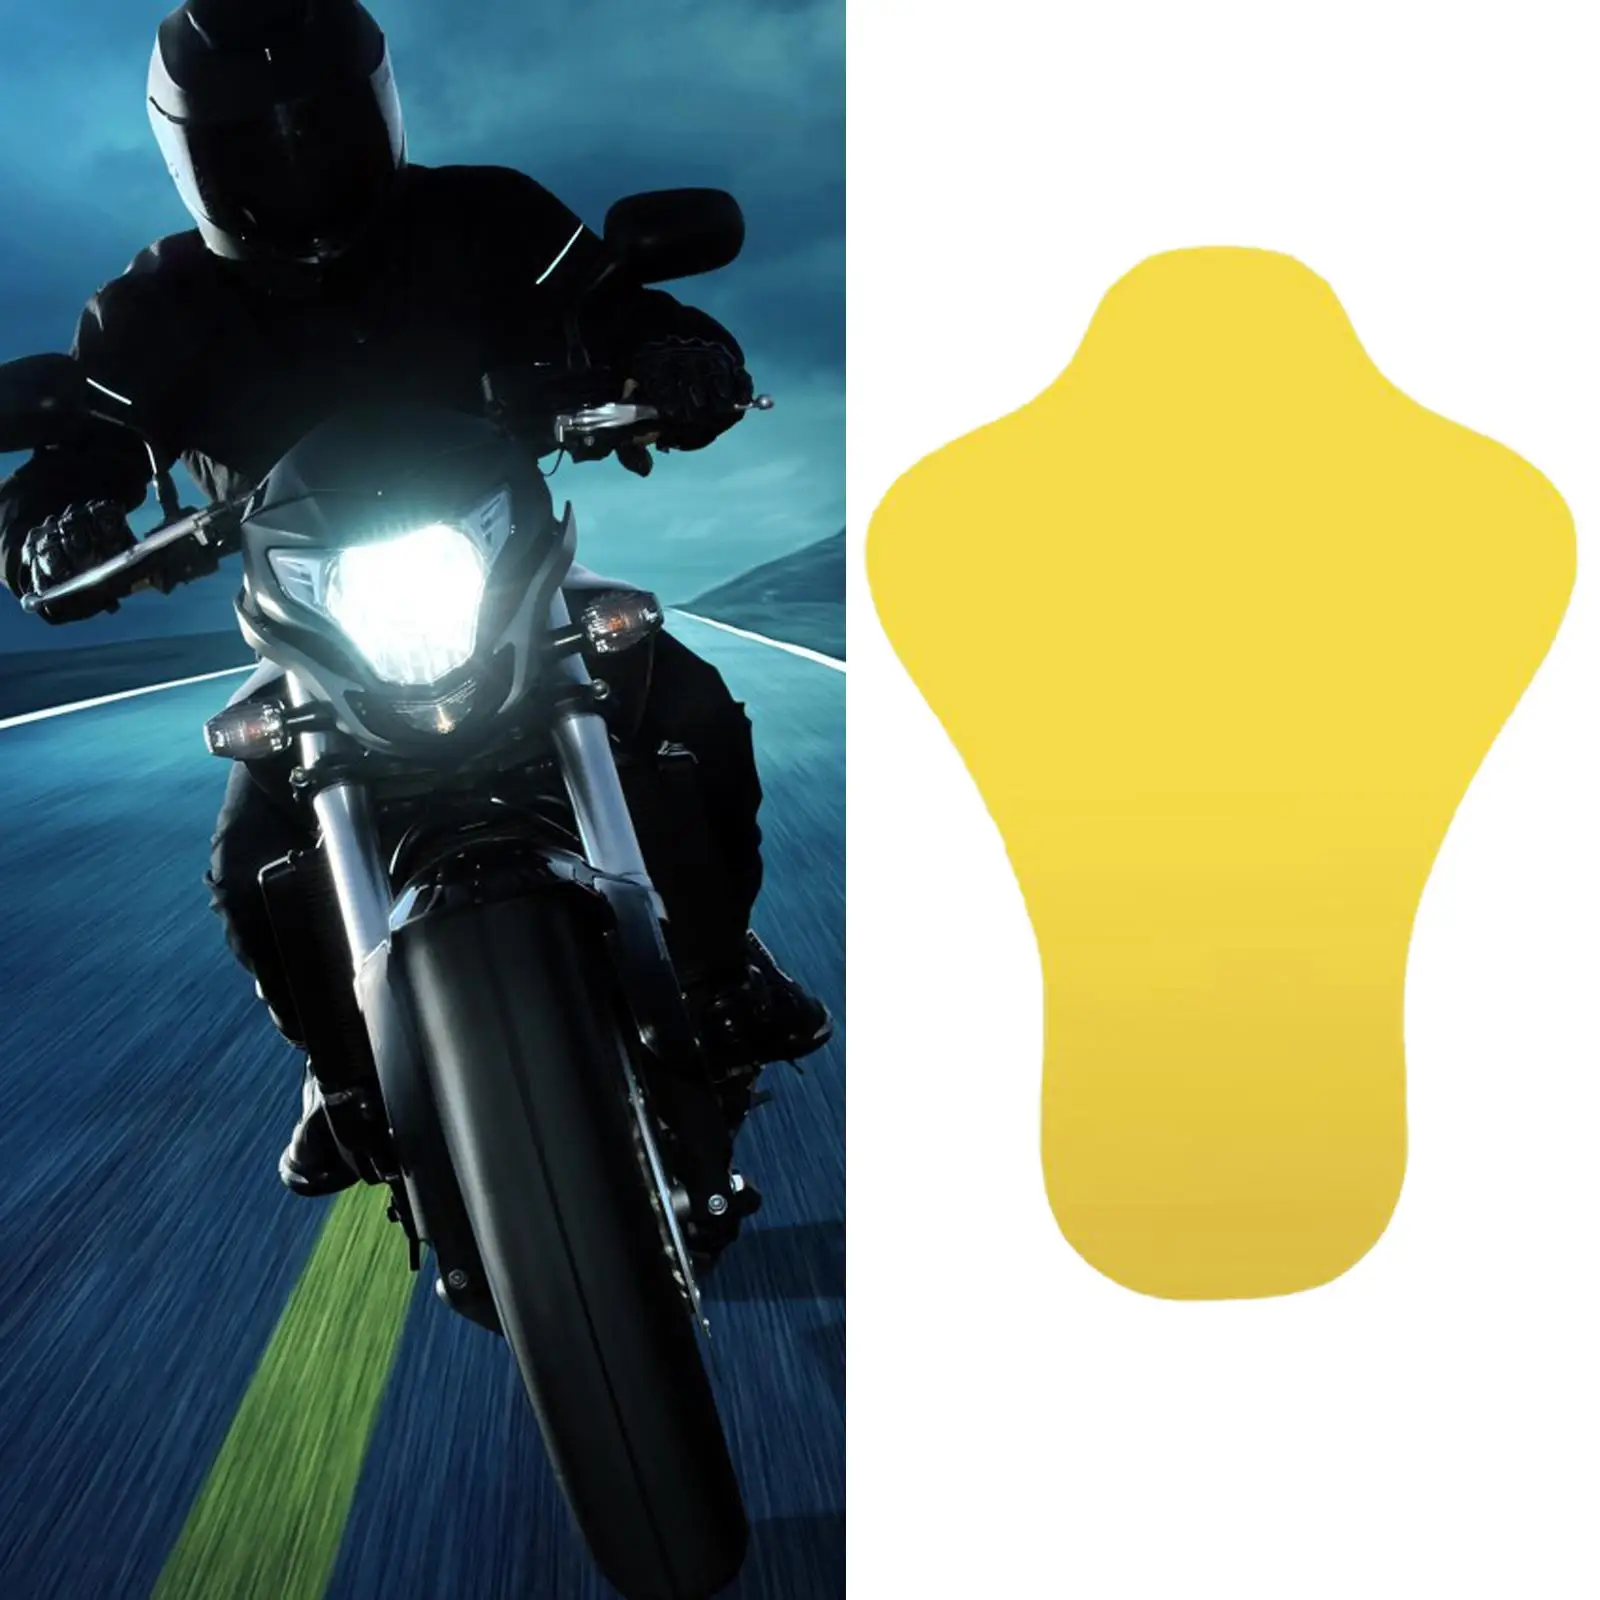   Motorcycle Jacket Insert Armor Protectors Set Back Chest Guard